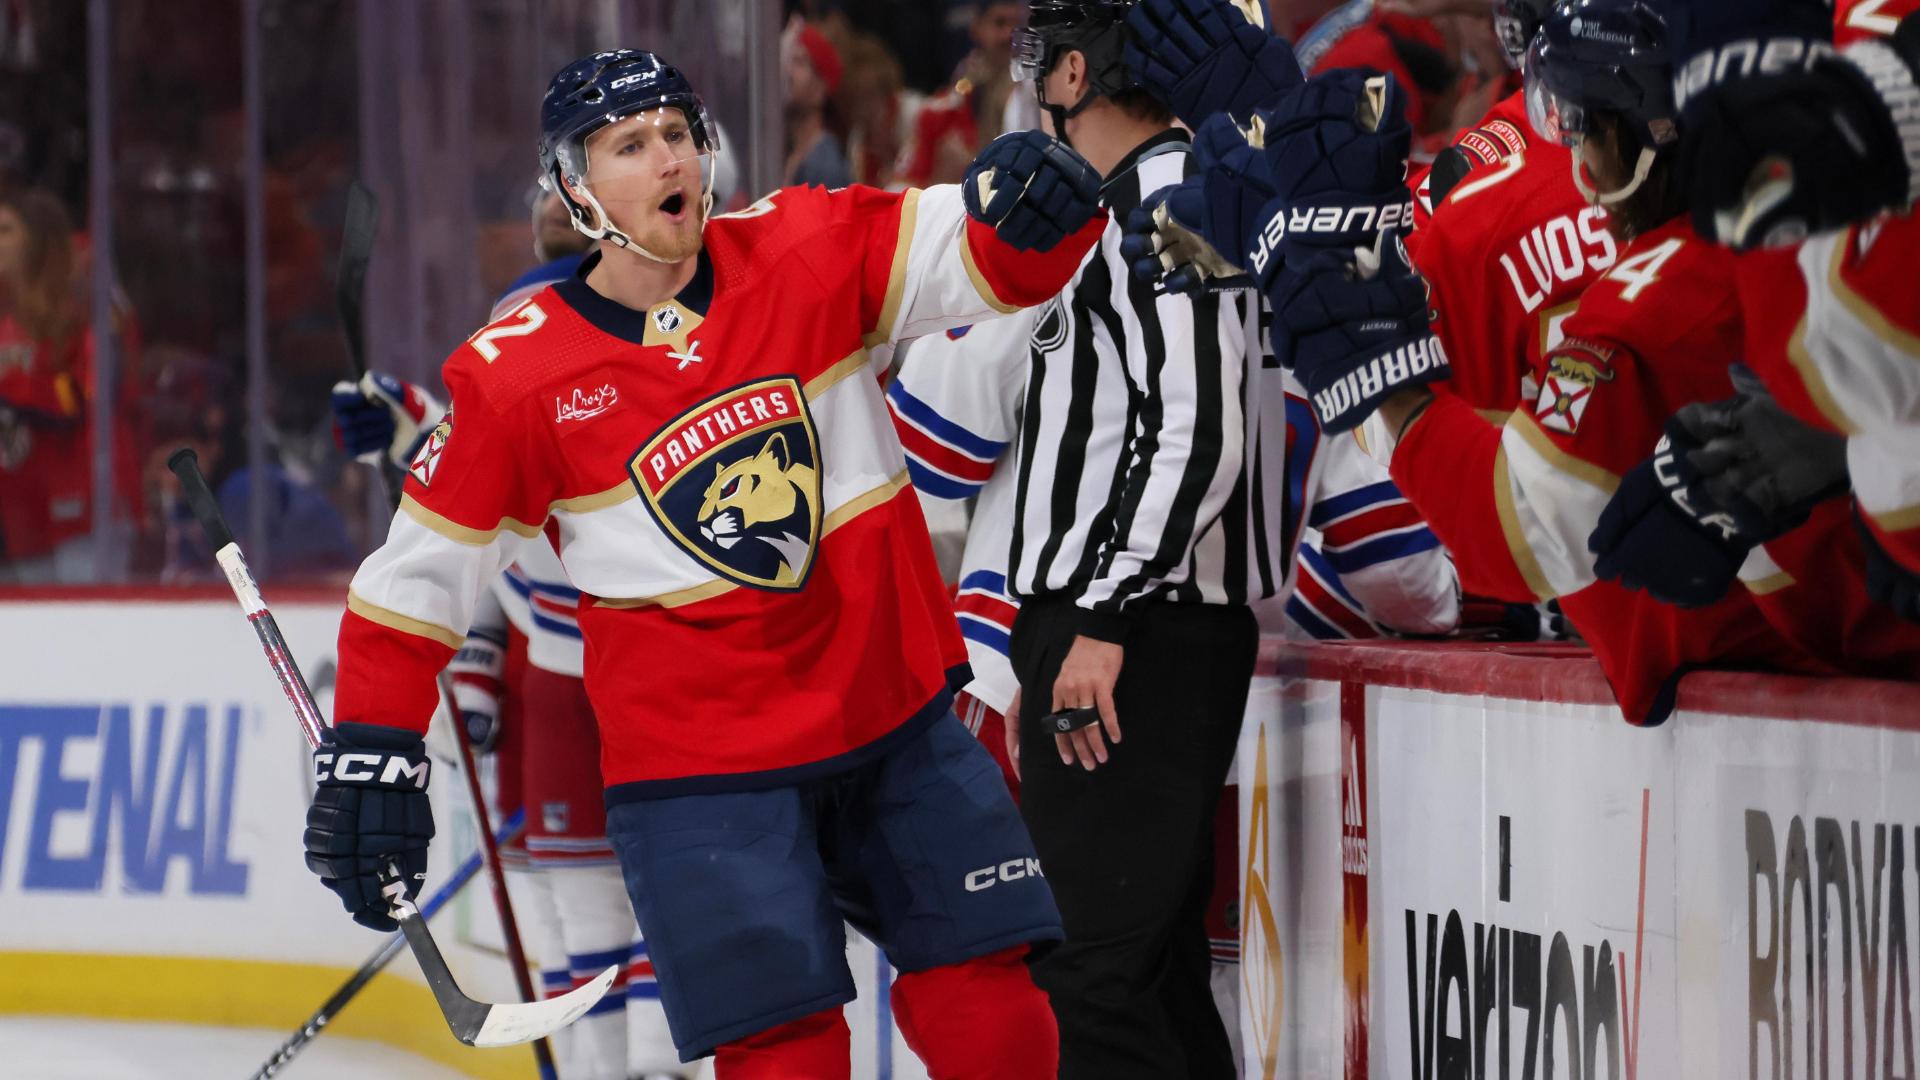 Gustav Forsling scores tying goal for the Panthers